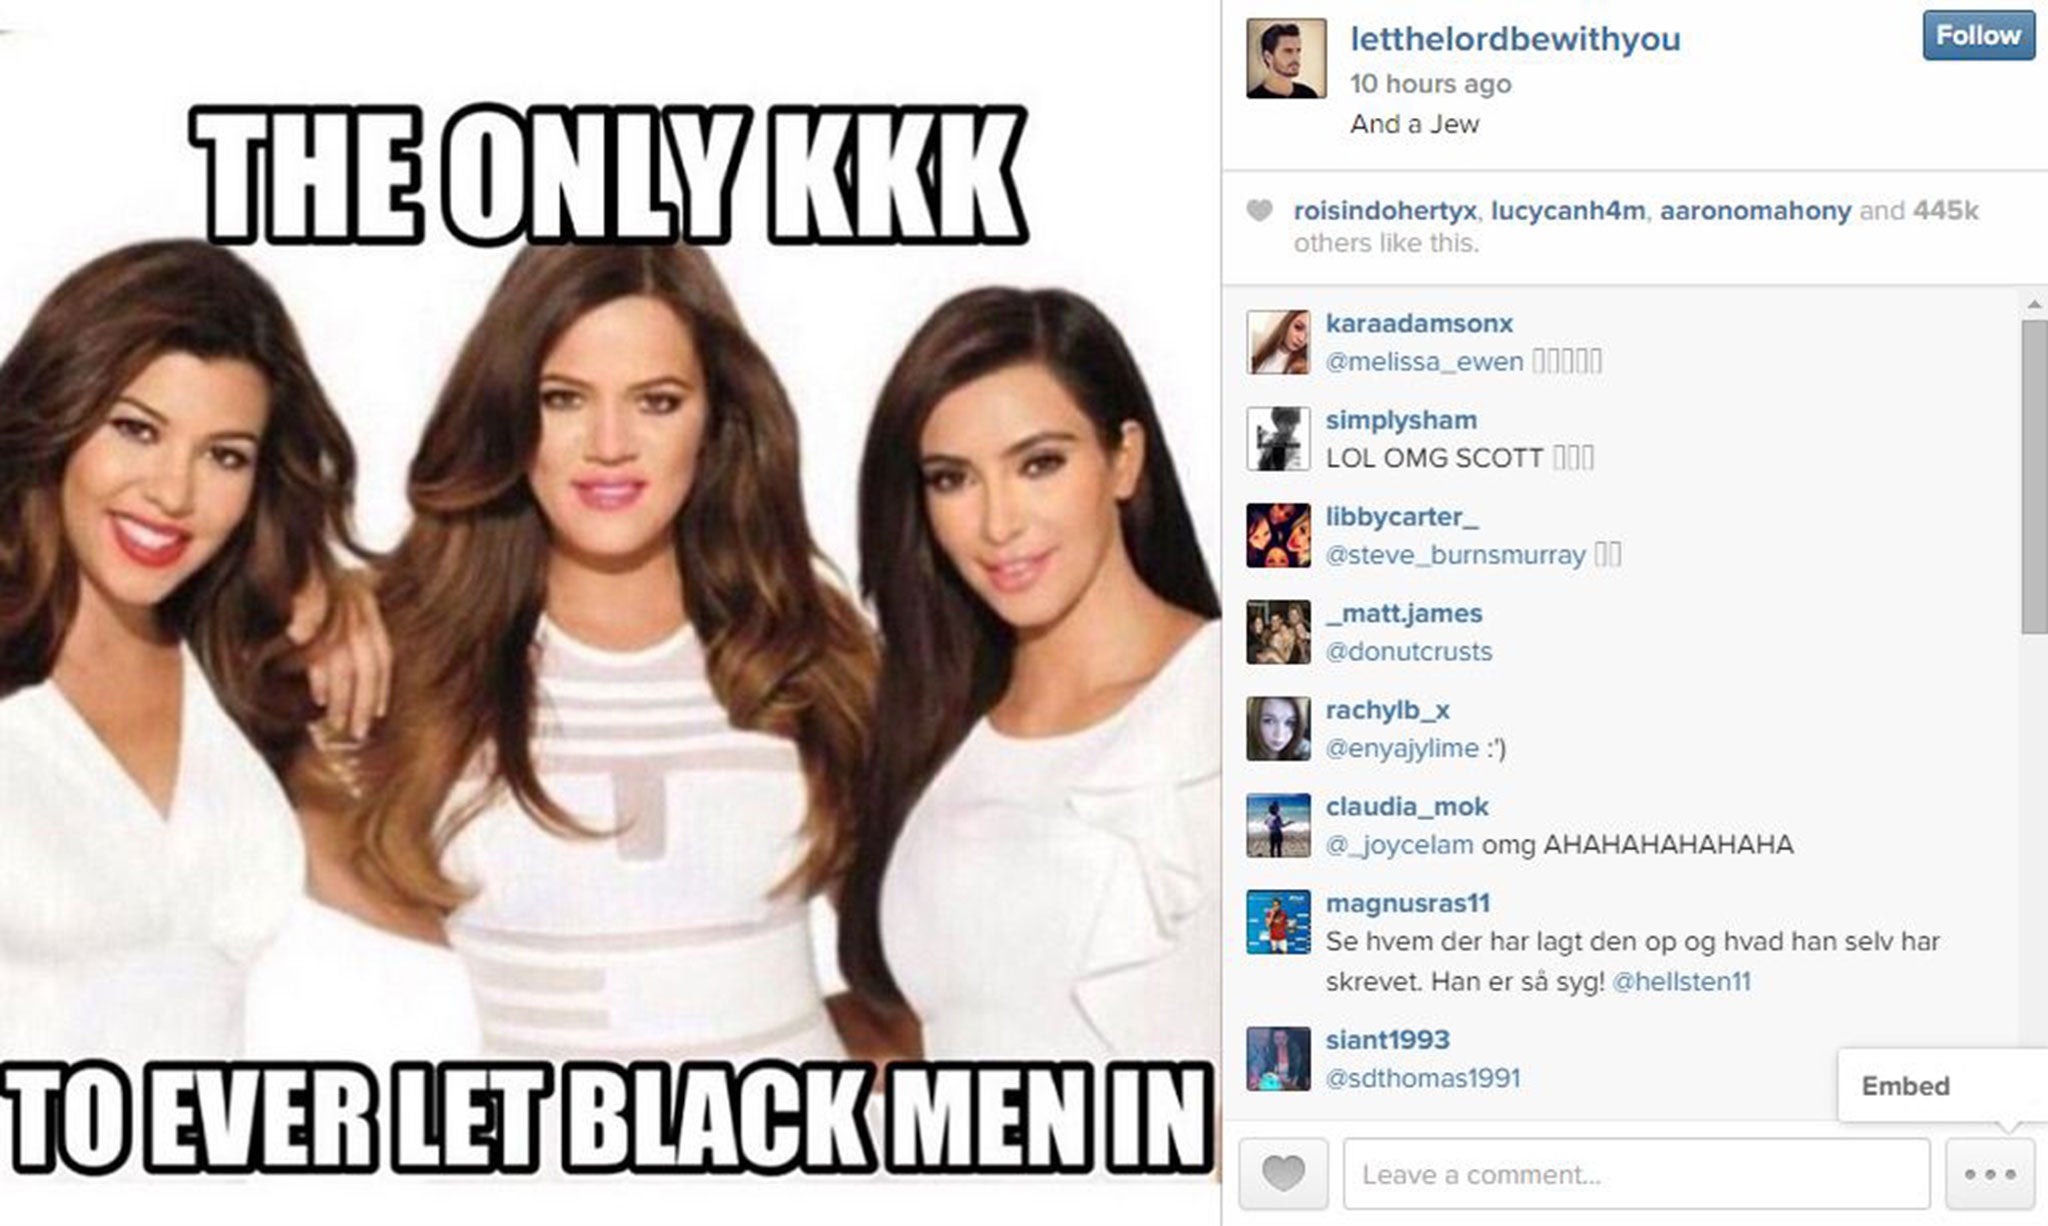 The controversial image as shared by Scott Disick on Instagram